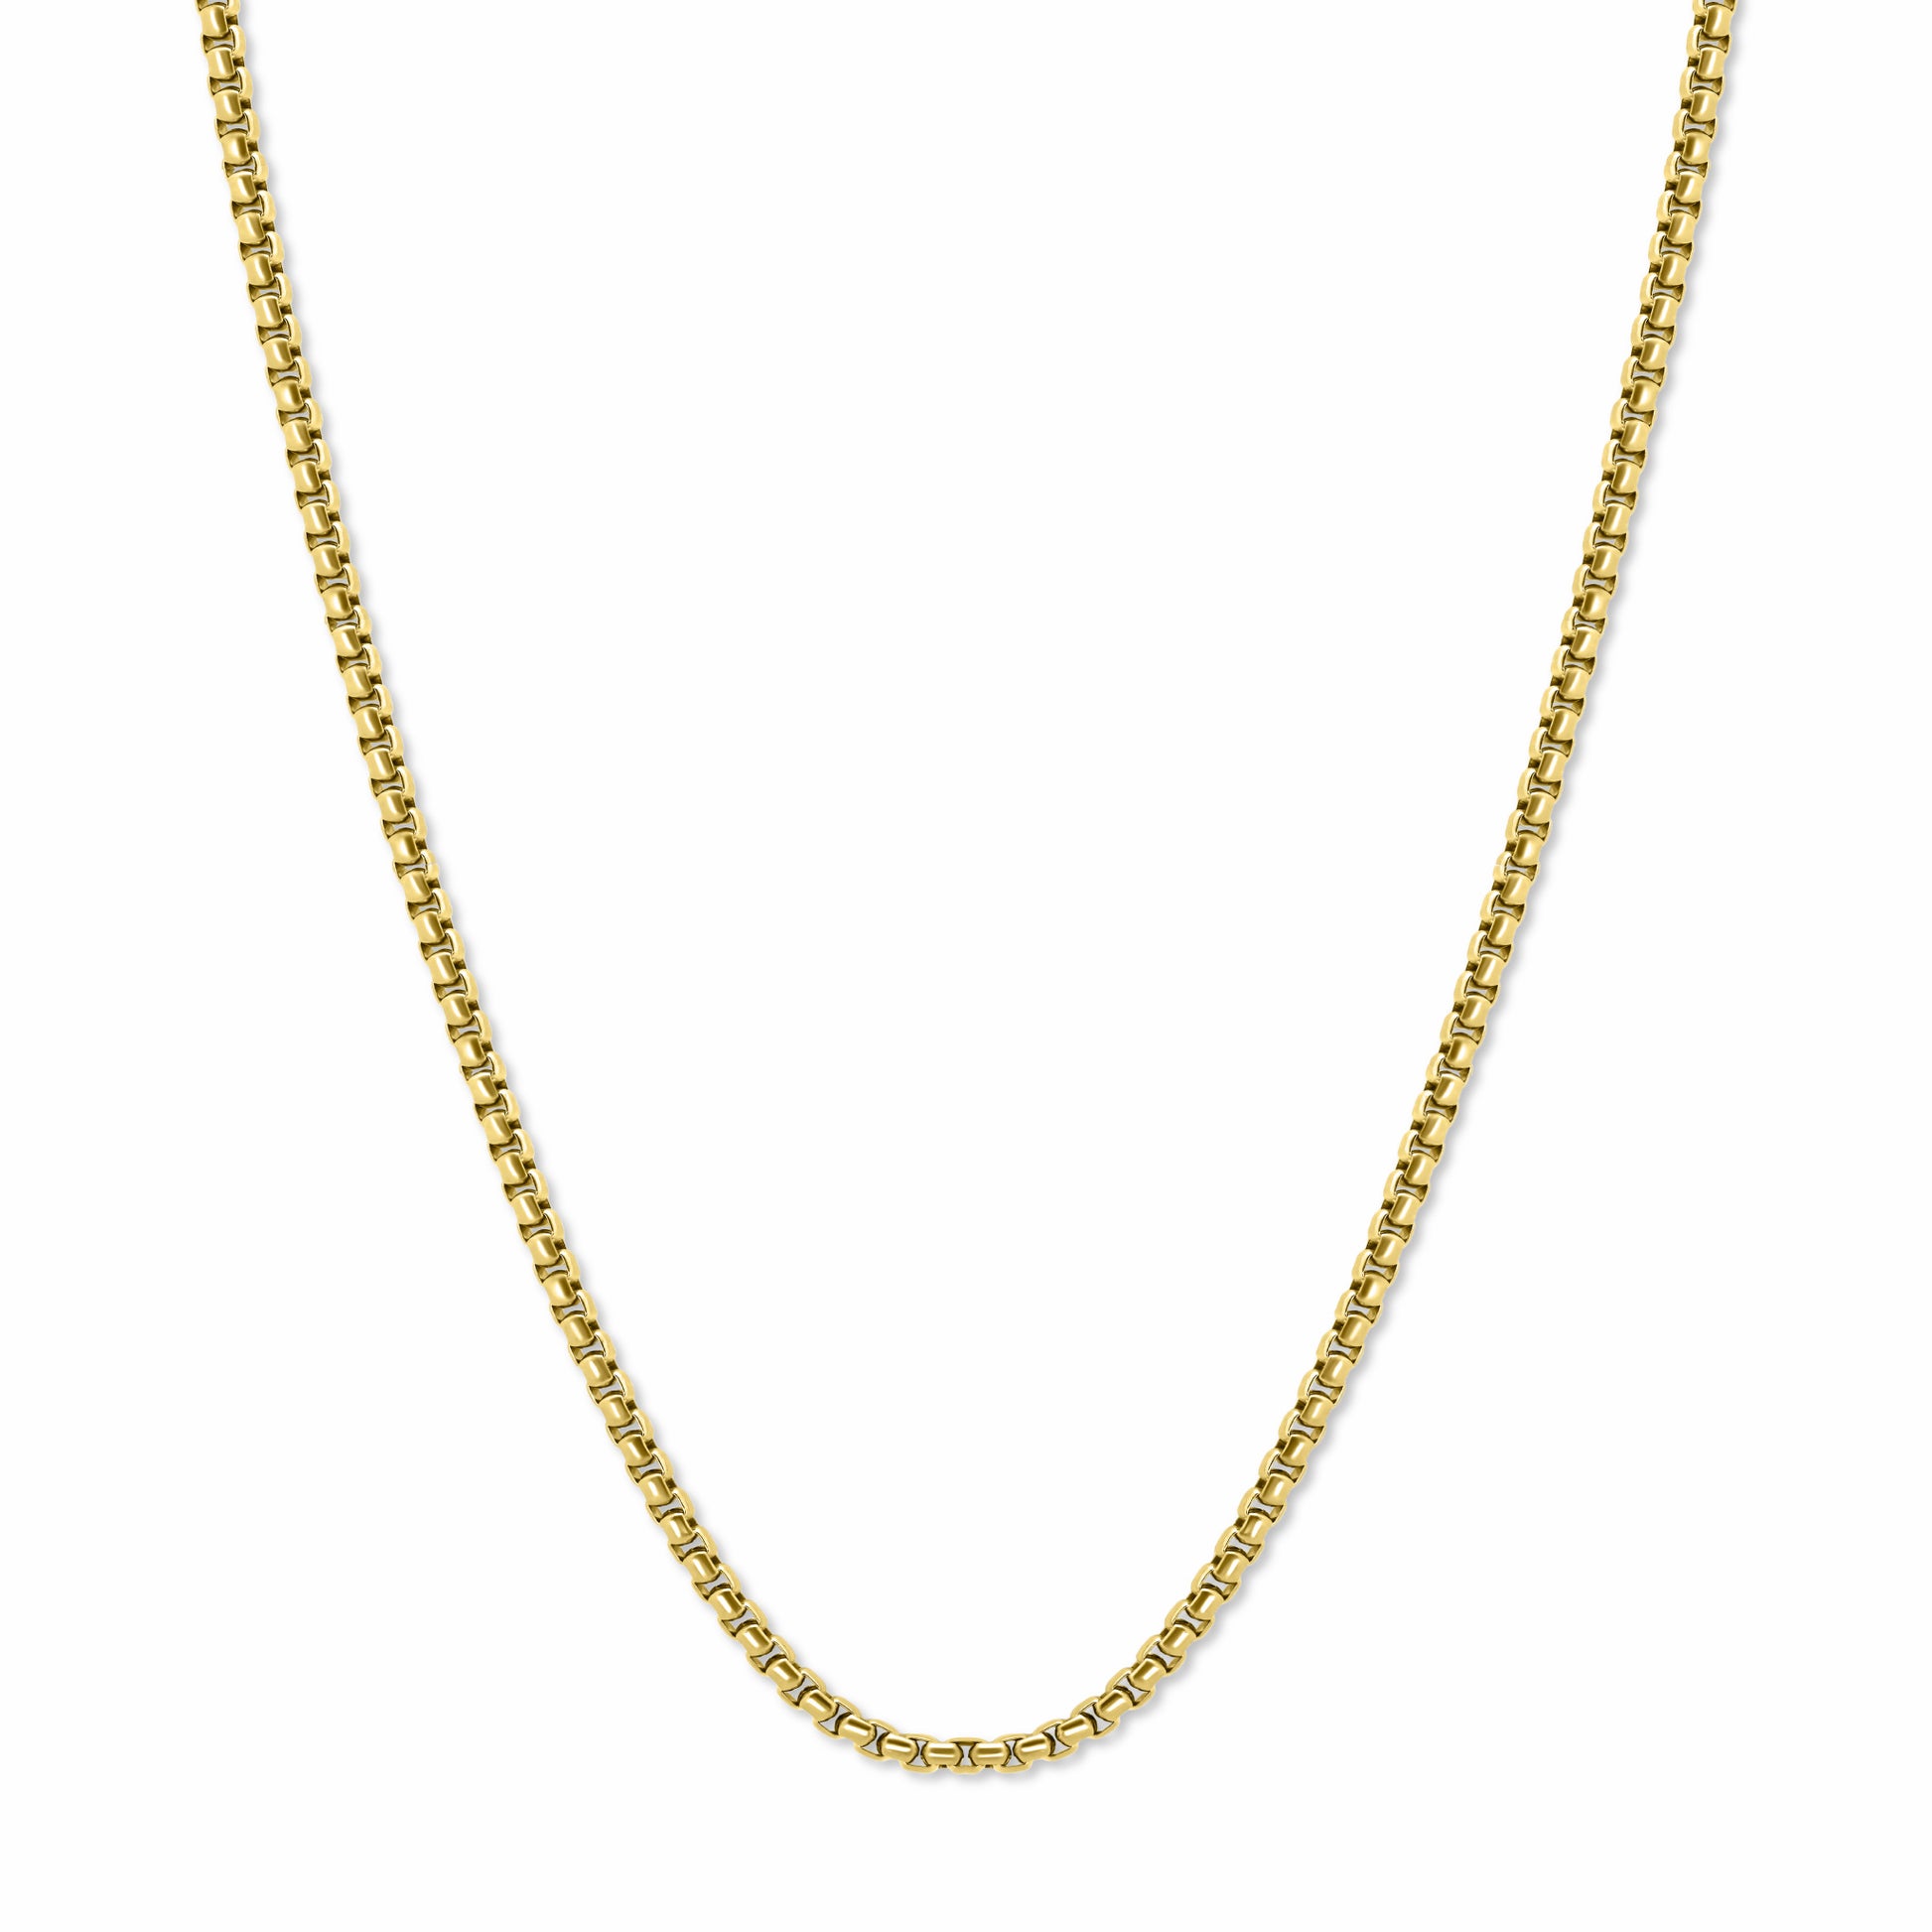 Round Box Link Chain Gold 3mm on a white background